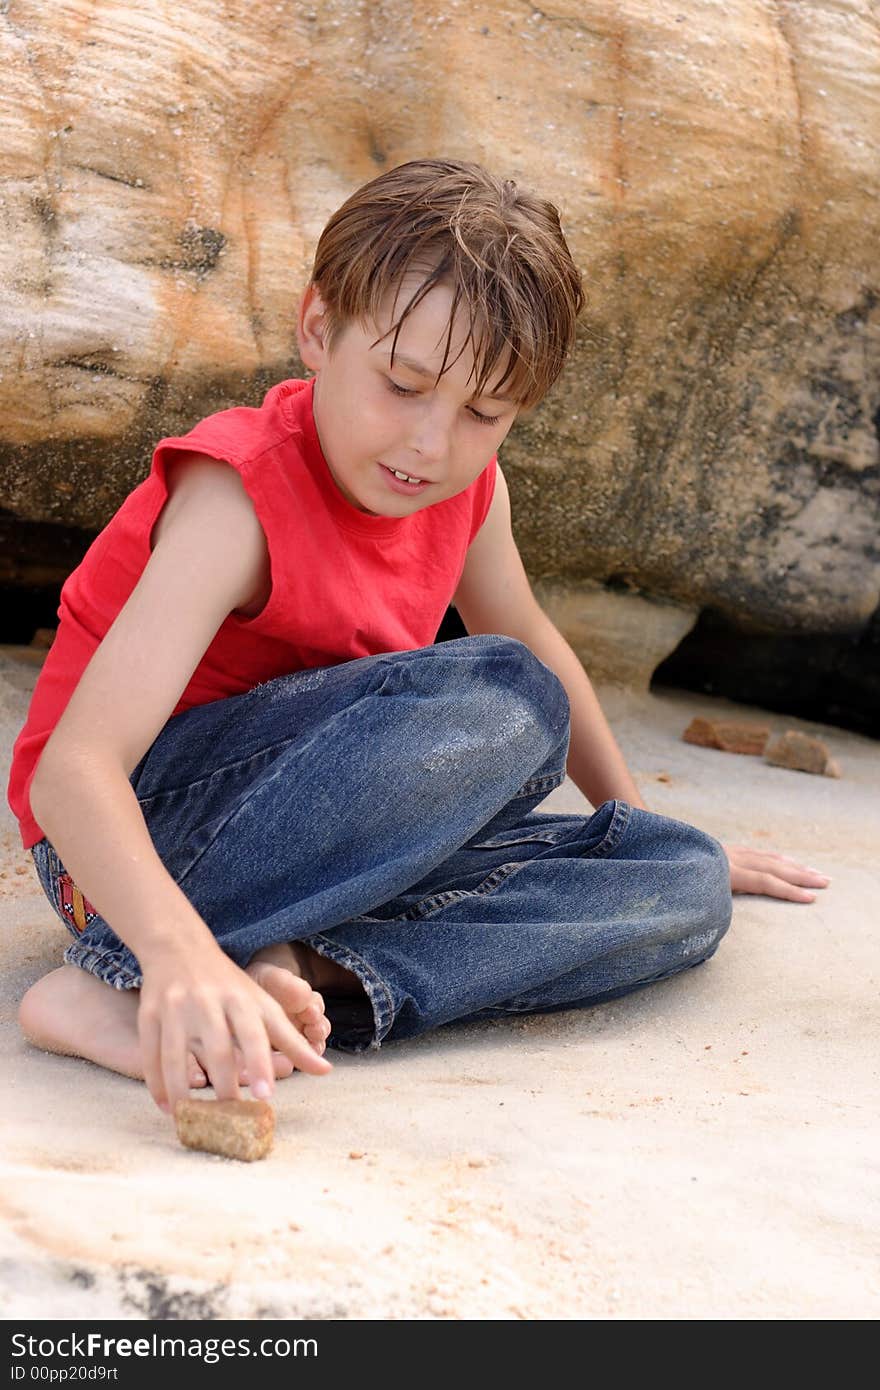 A casually dressed boy amuses himself playing with stones among sandstone rocks outdoors. A casually dressed boy amuses himself playing with stones among sandstone rocks outdoors